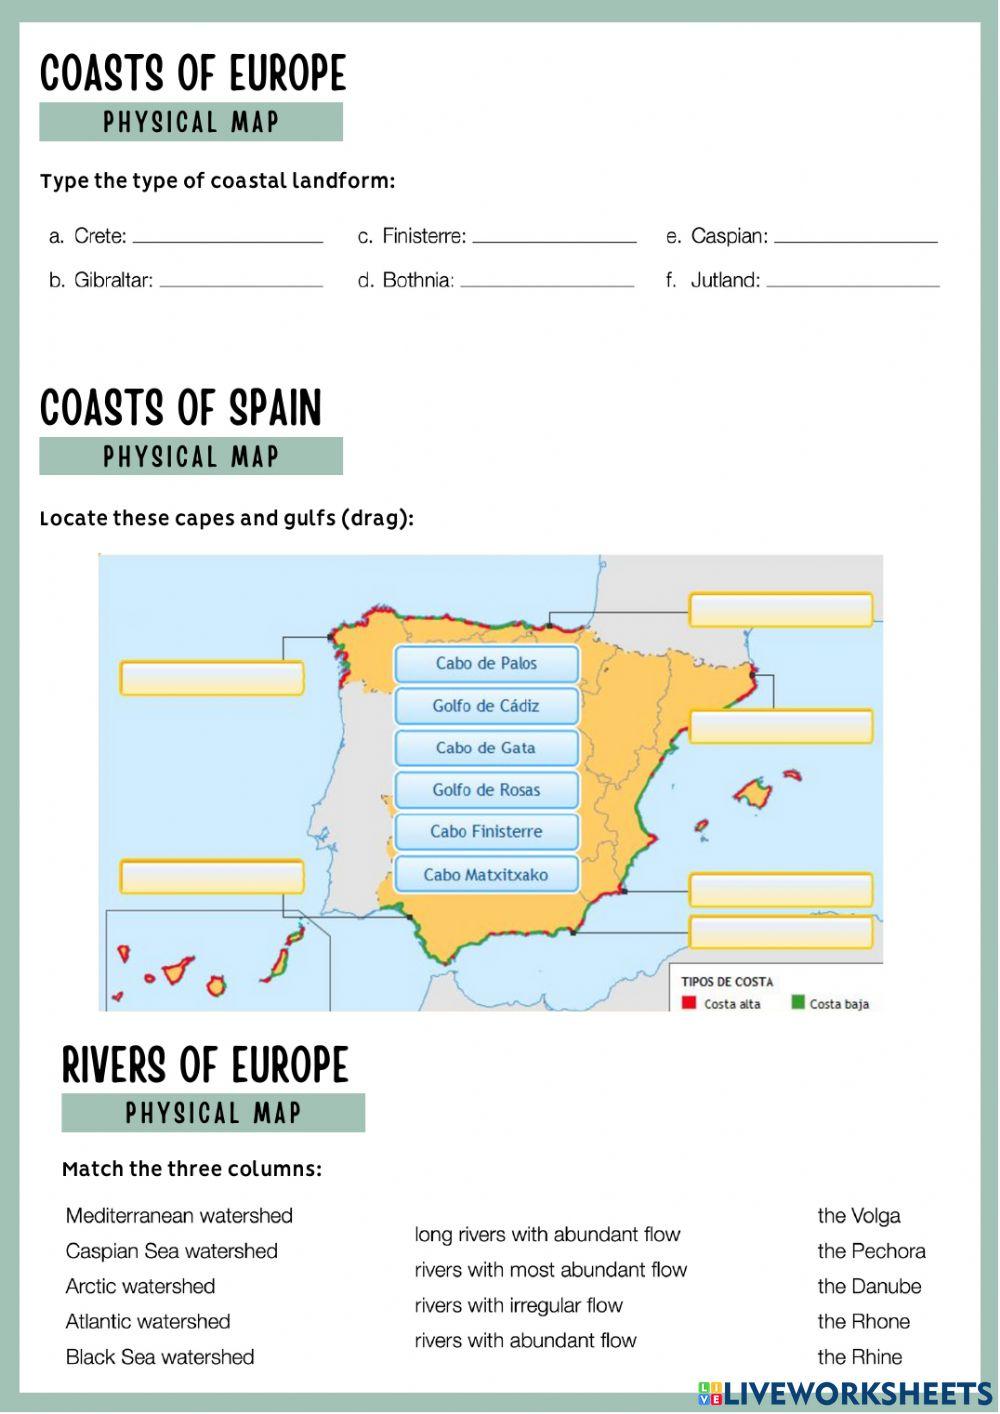 Geography of Spain and Europe